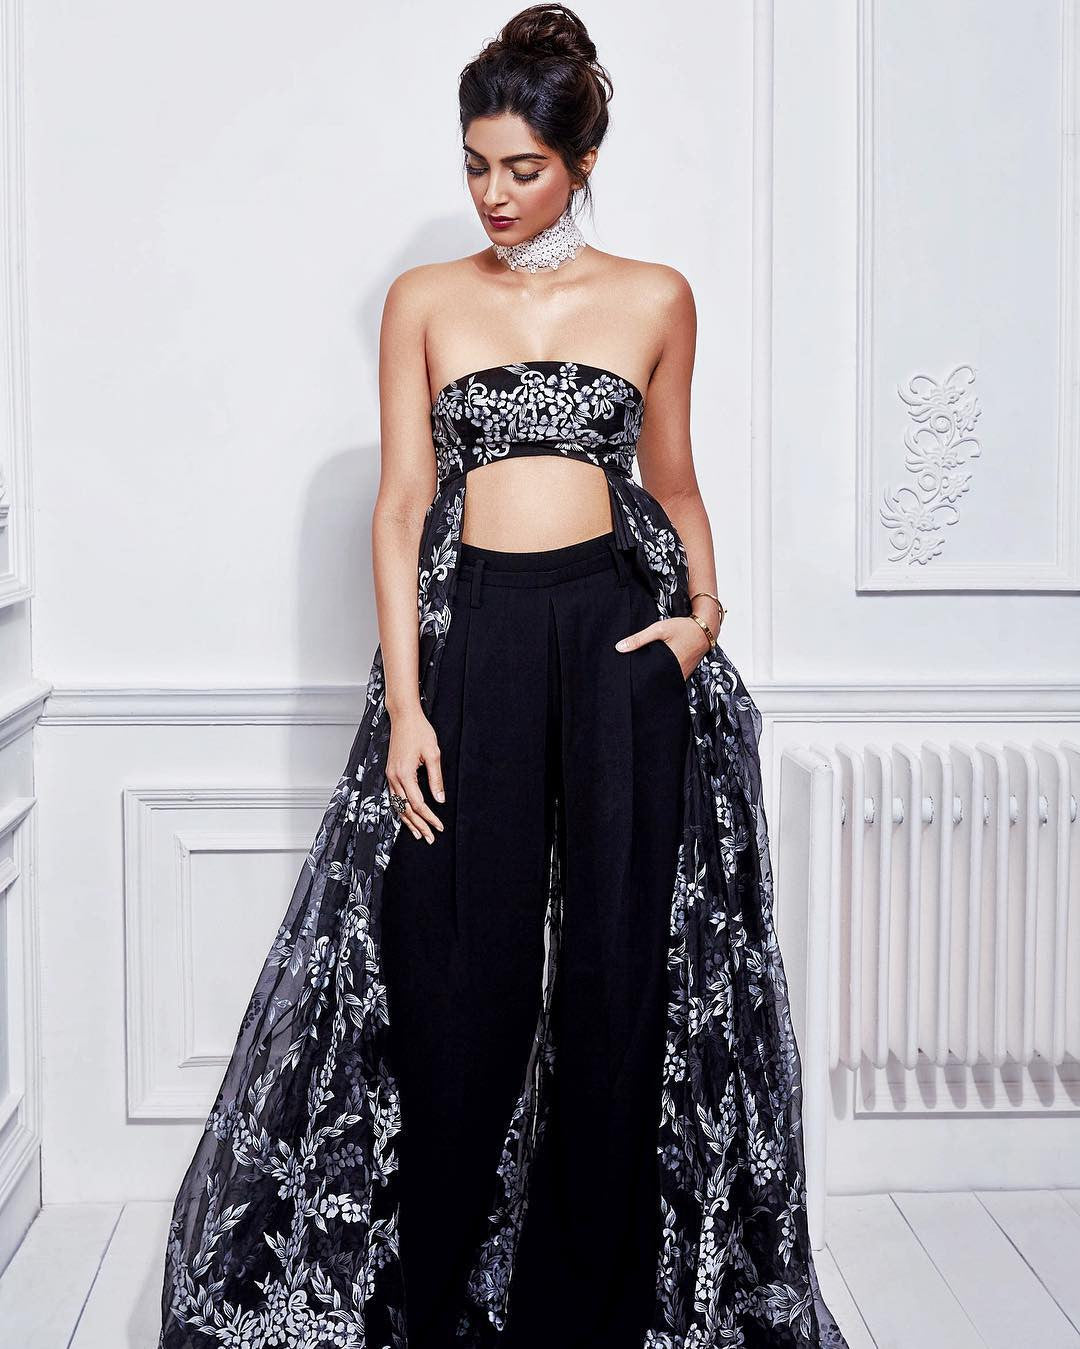 Sonam Kapoor looked hot in designer dress from Shehla Khan's Collection at recent photoshoot 